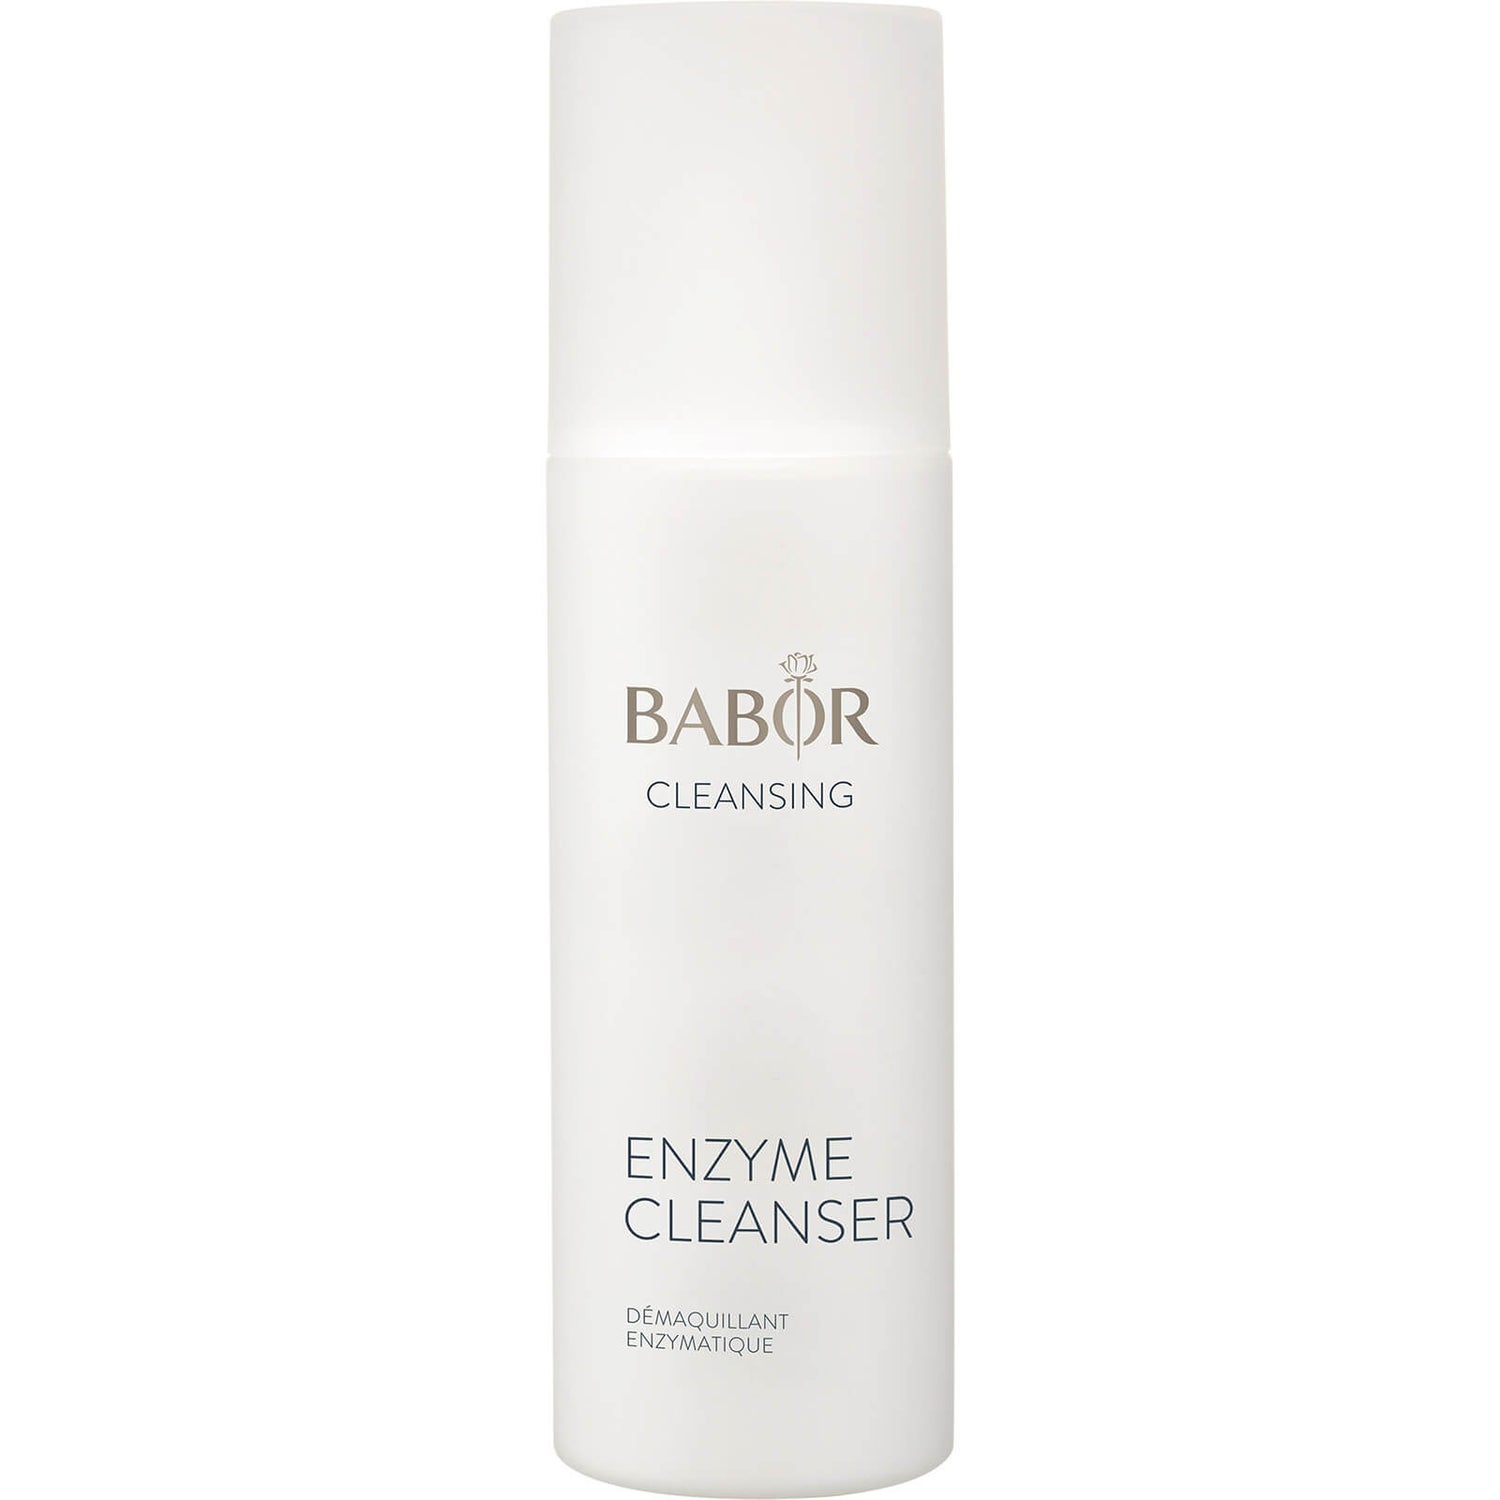 Detergente Enzyme Cleansing BABOR 75g